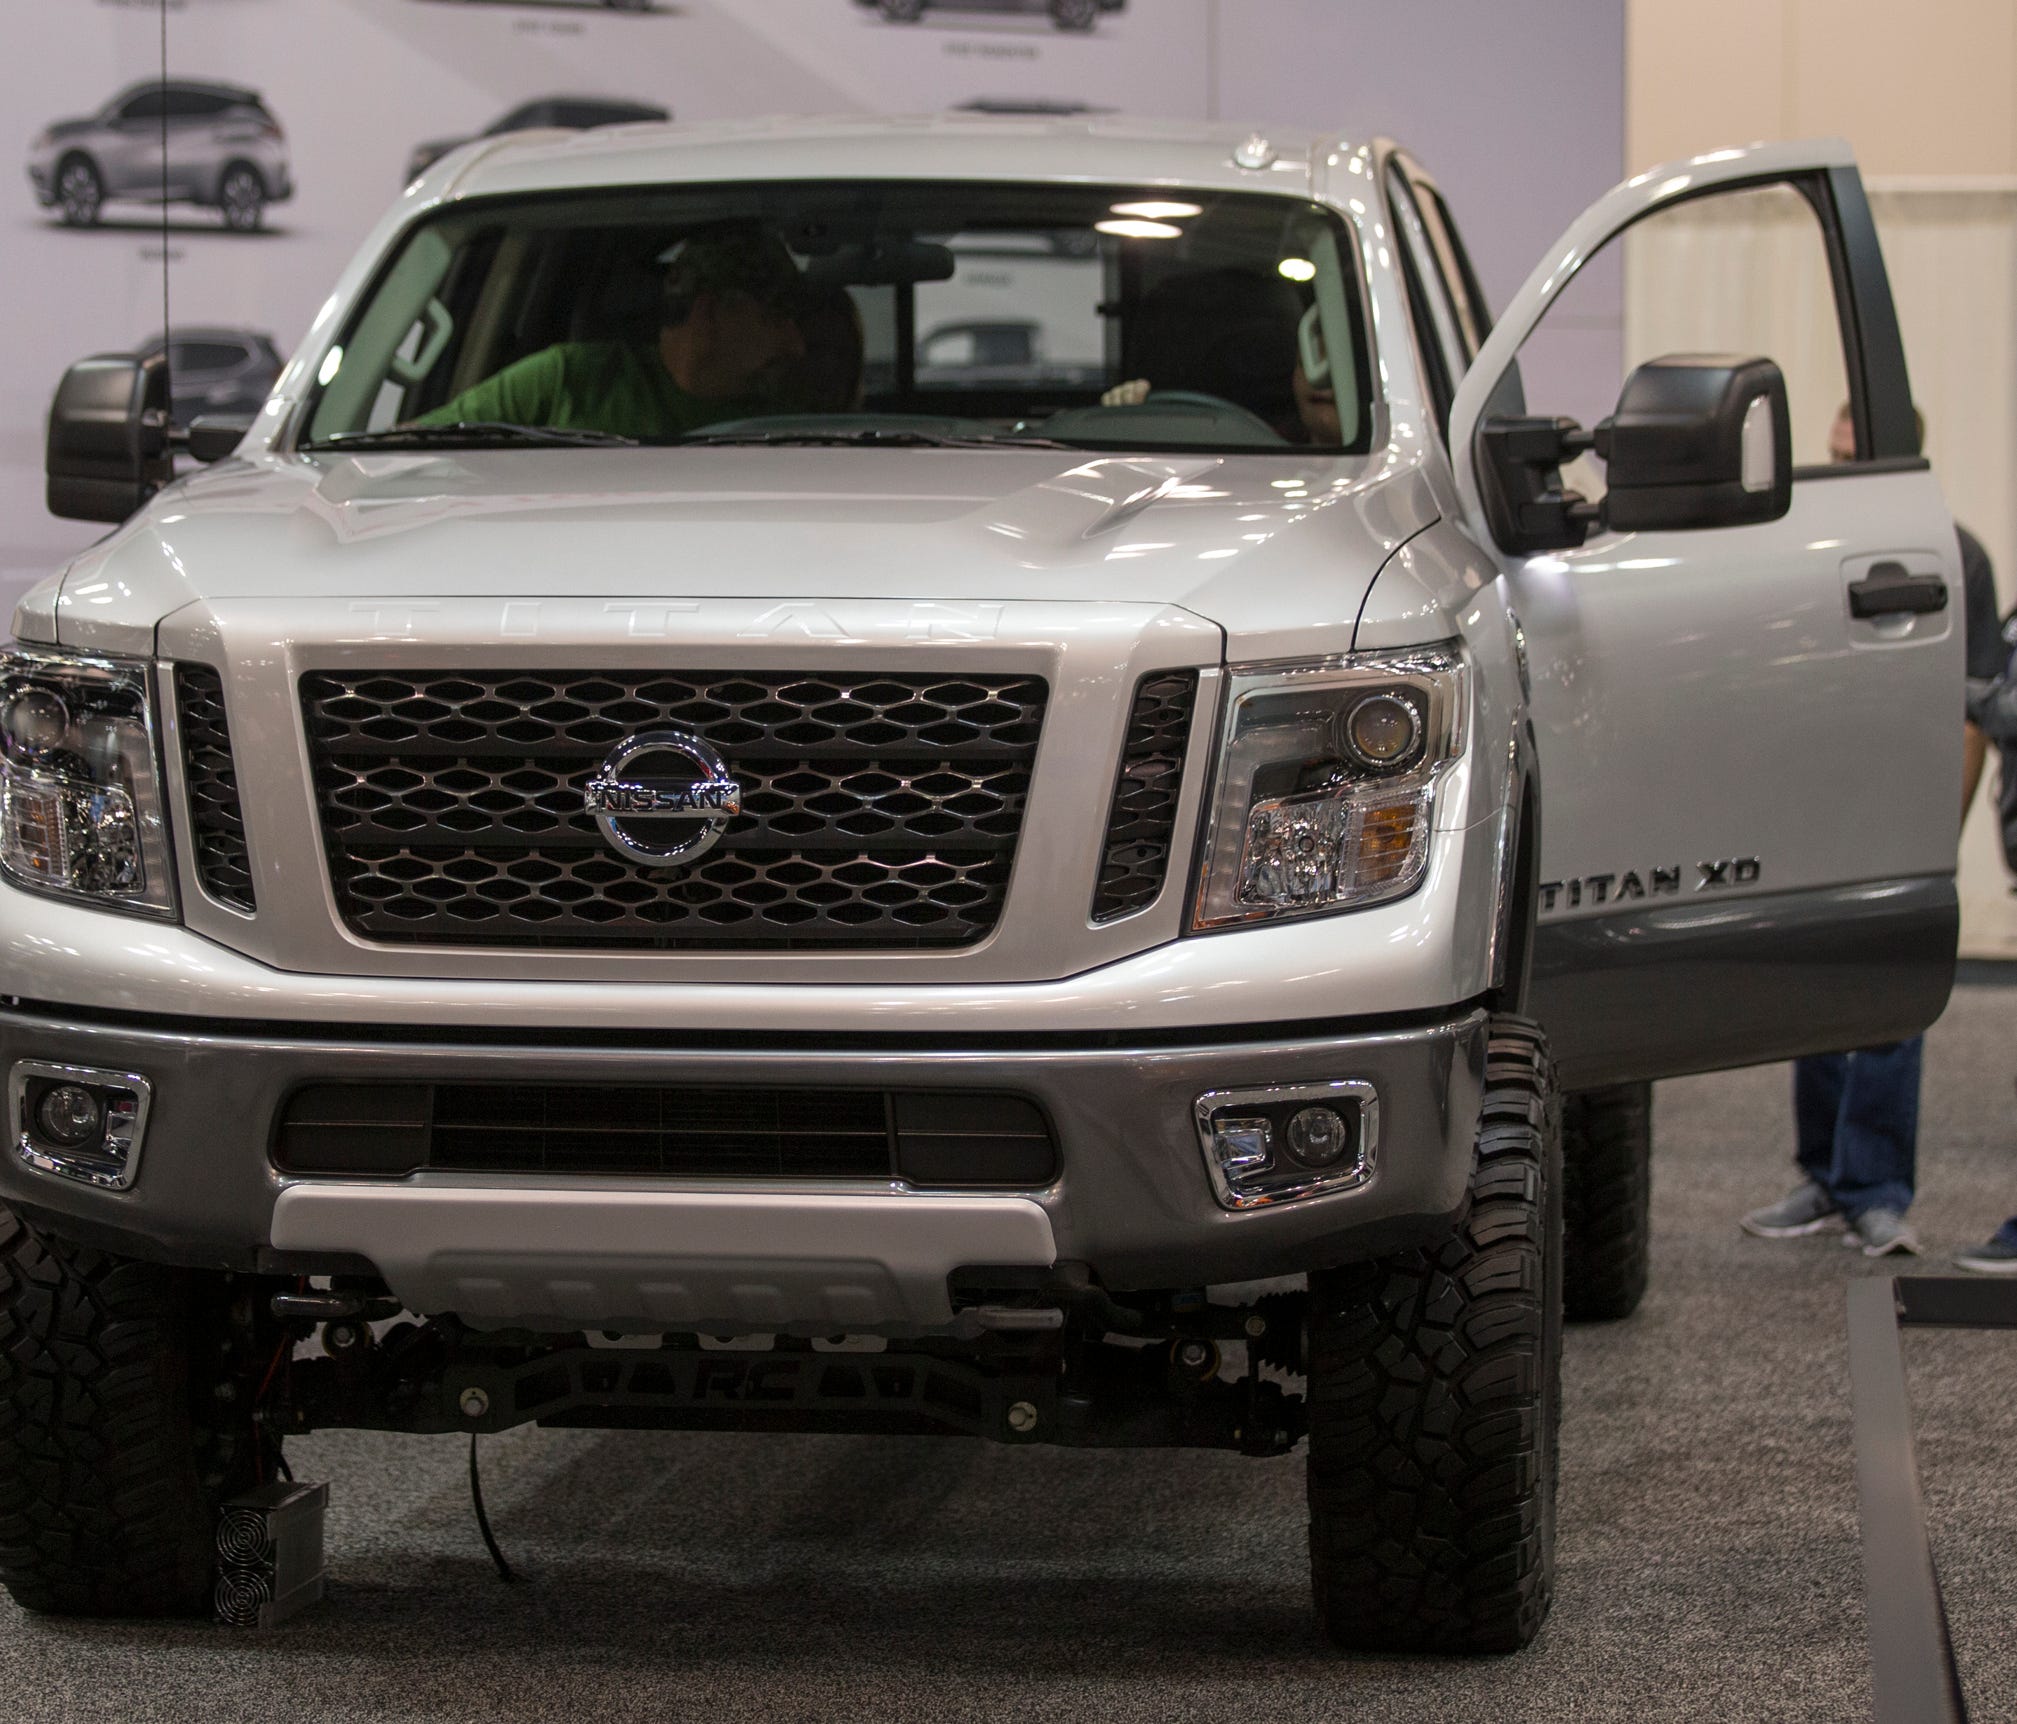 A Nissan Titan XD Pro 4X on display at the Indianapolis Autoshow, Indiana Convention Center, Indianapolis, Tuesday, Dec. 26, 2017. The show, featuring 2018 models, runs through New Year's Day and includes cars from the U.S., Japan, Korea, Italy, and 